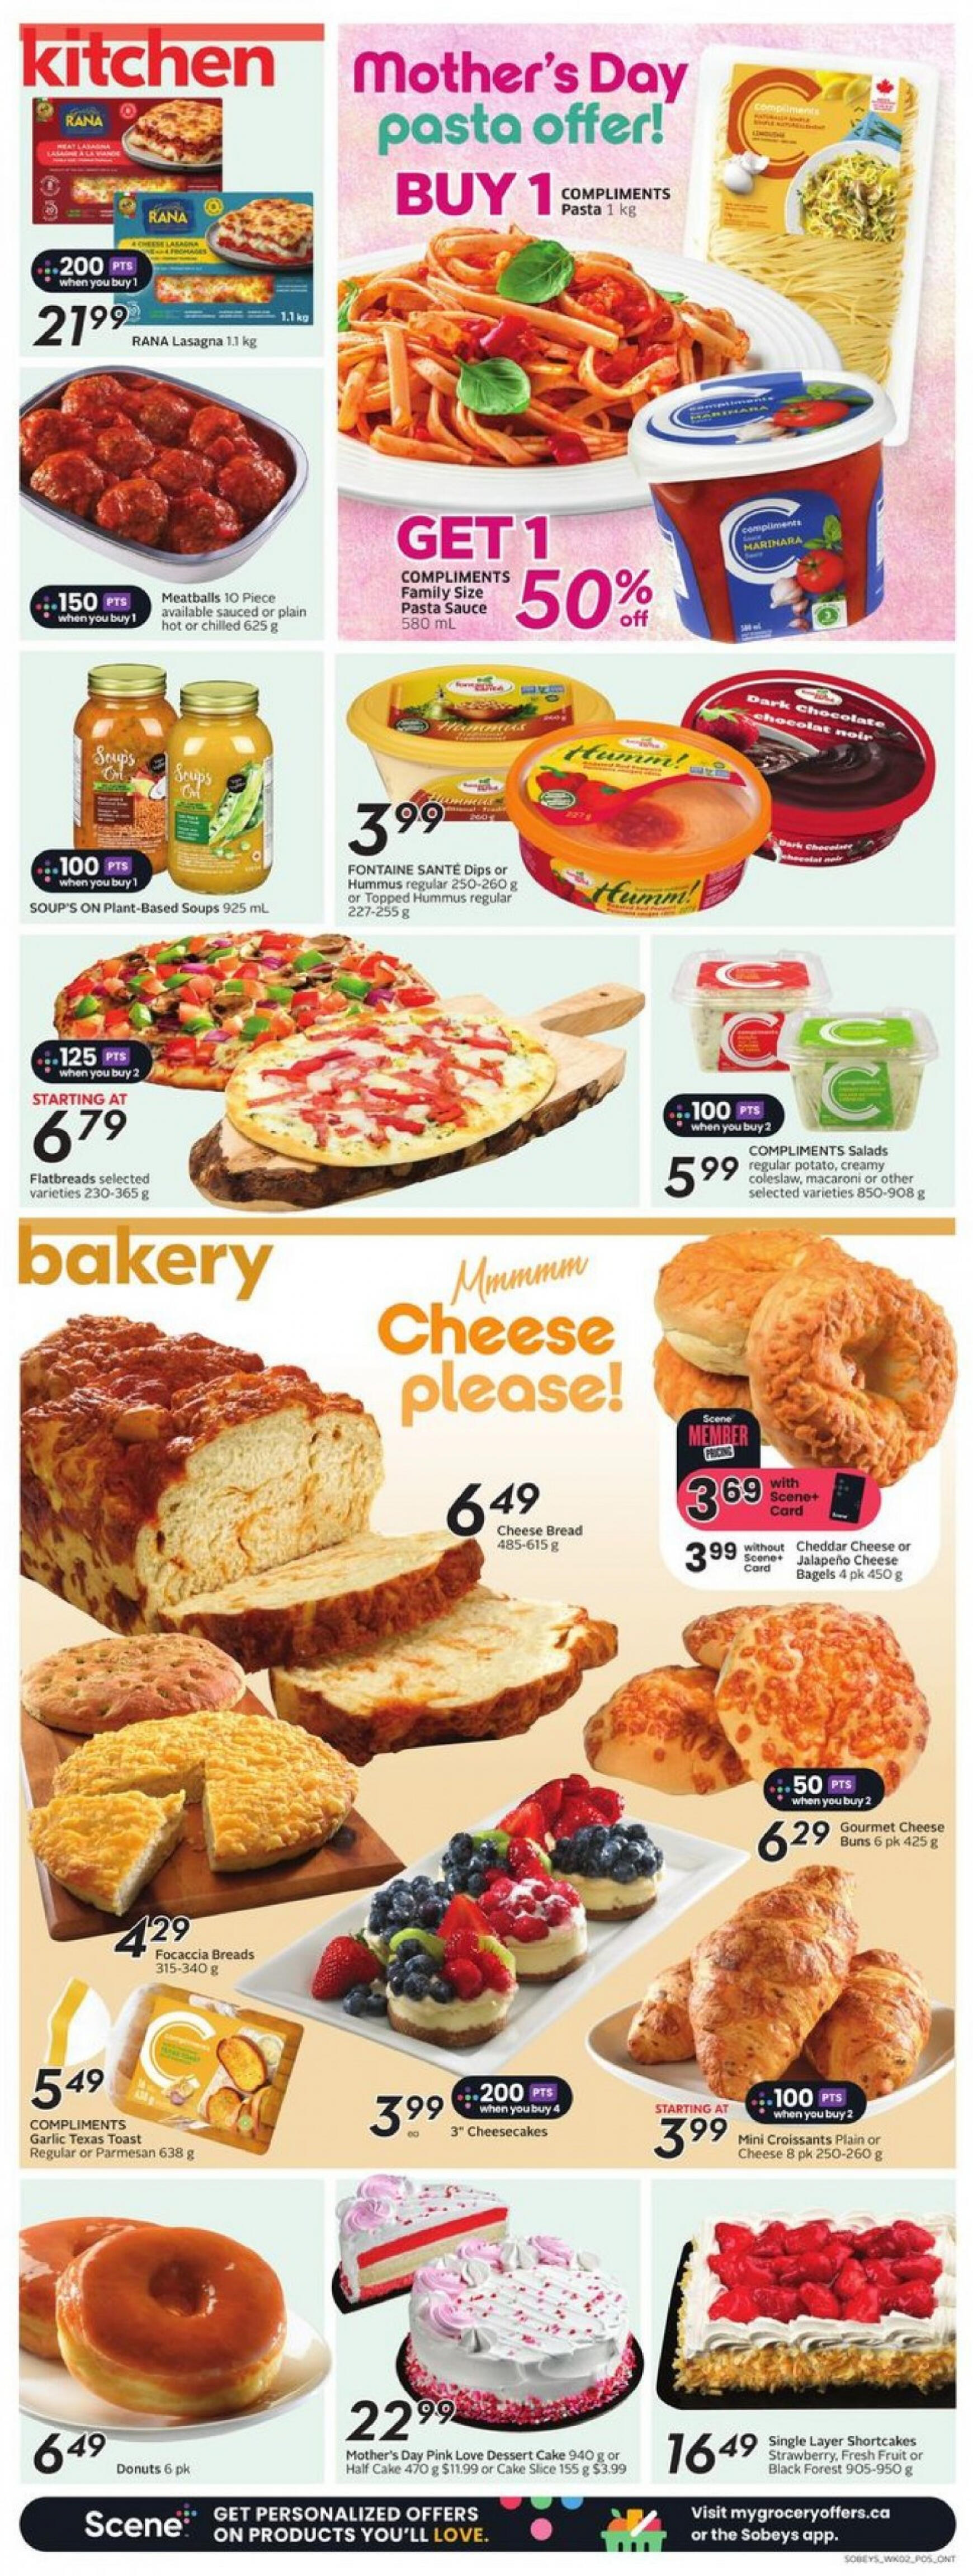 sobeys - Sobeys - Weekly Flyer - Ontario flyer current 09.05. - 15.05. - page: 10